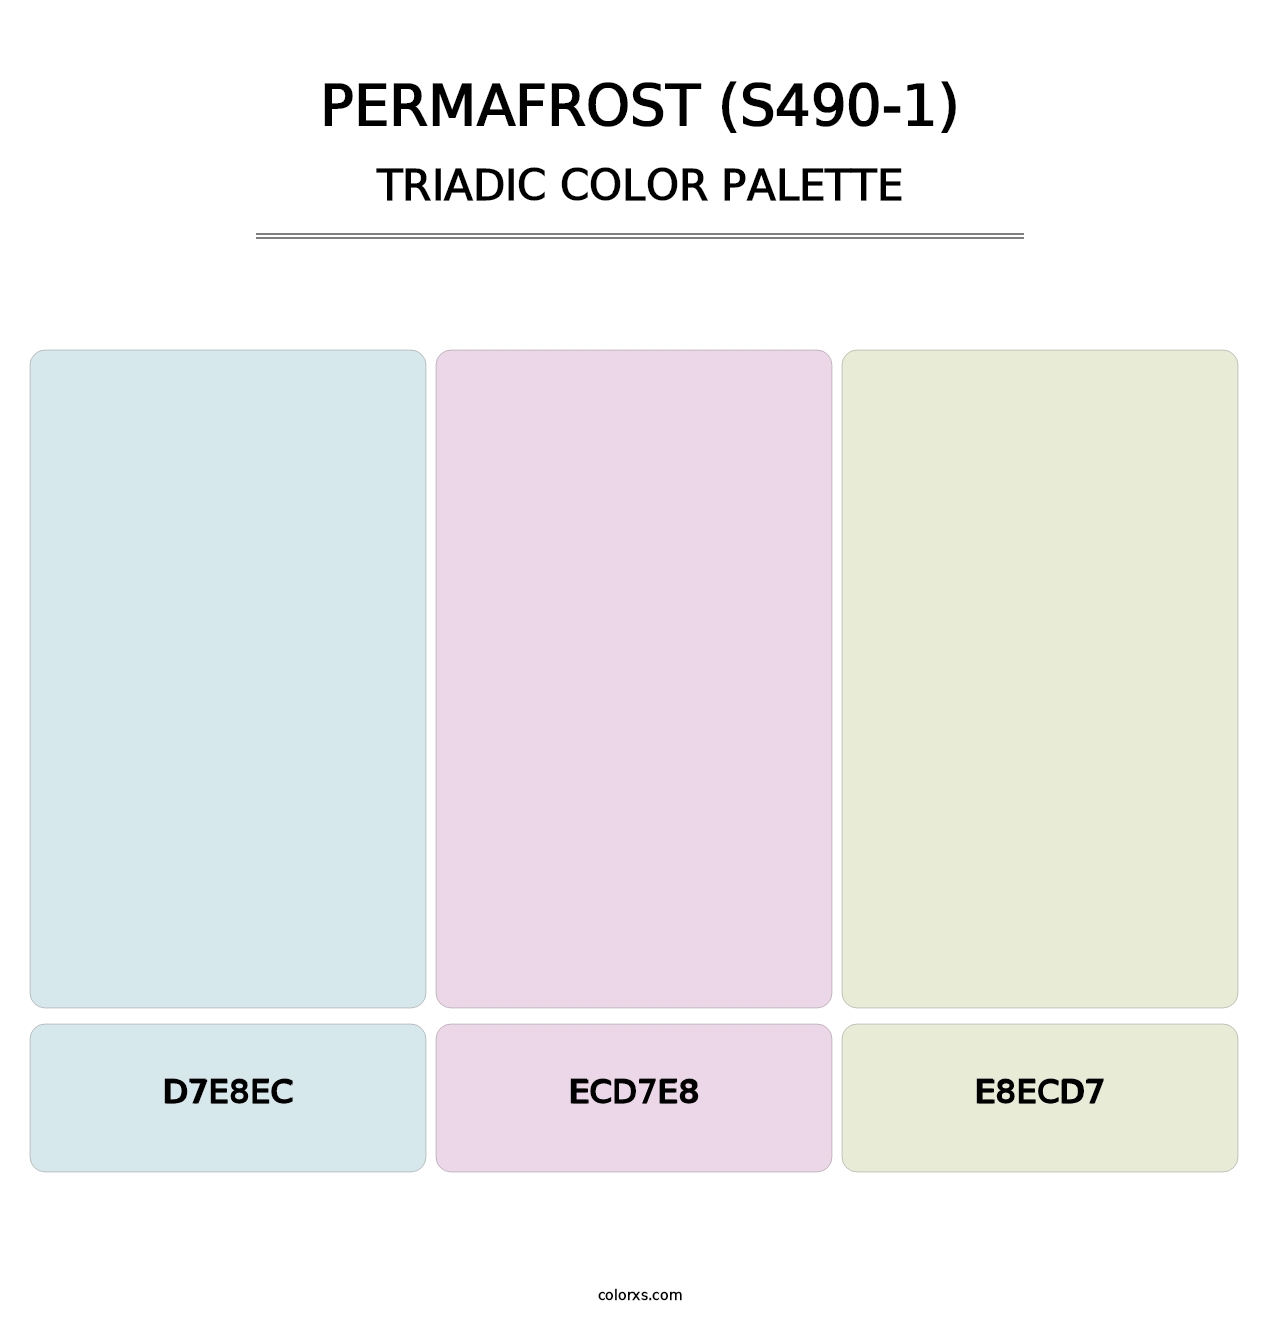 Permafrost (S490-1) - Triadic Color Palette